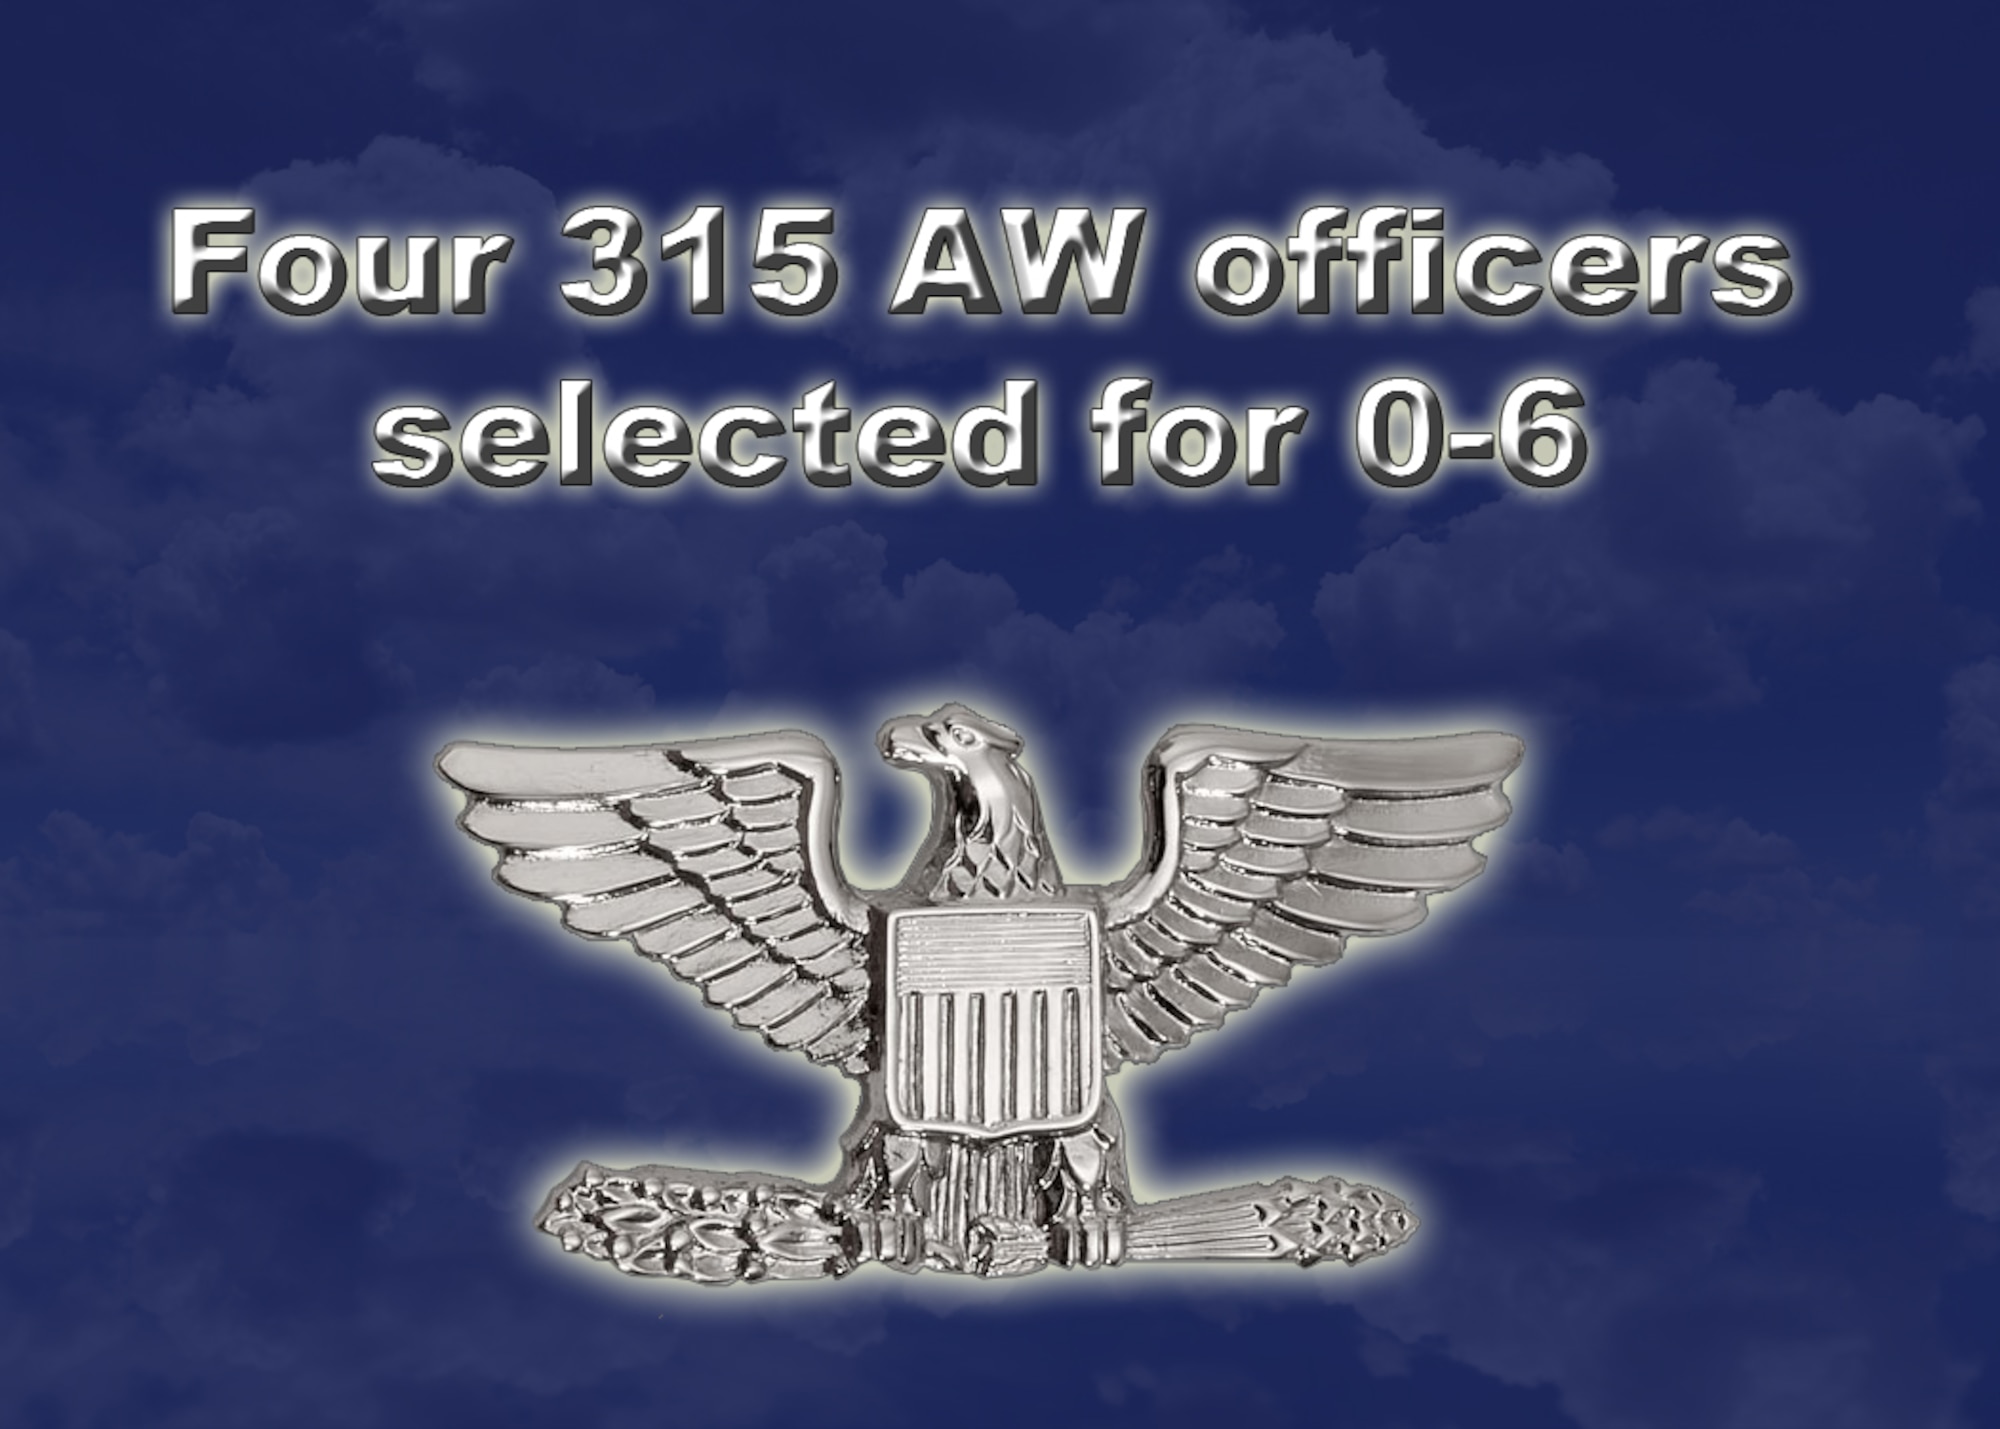 Four 315 AW officer selected for 0-6 (U.S. Air Force Reserve graphic by Michael Dukes)